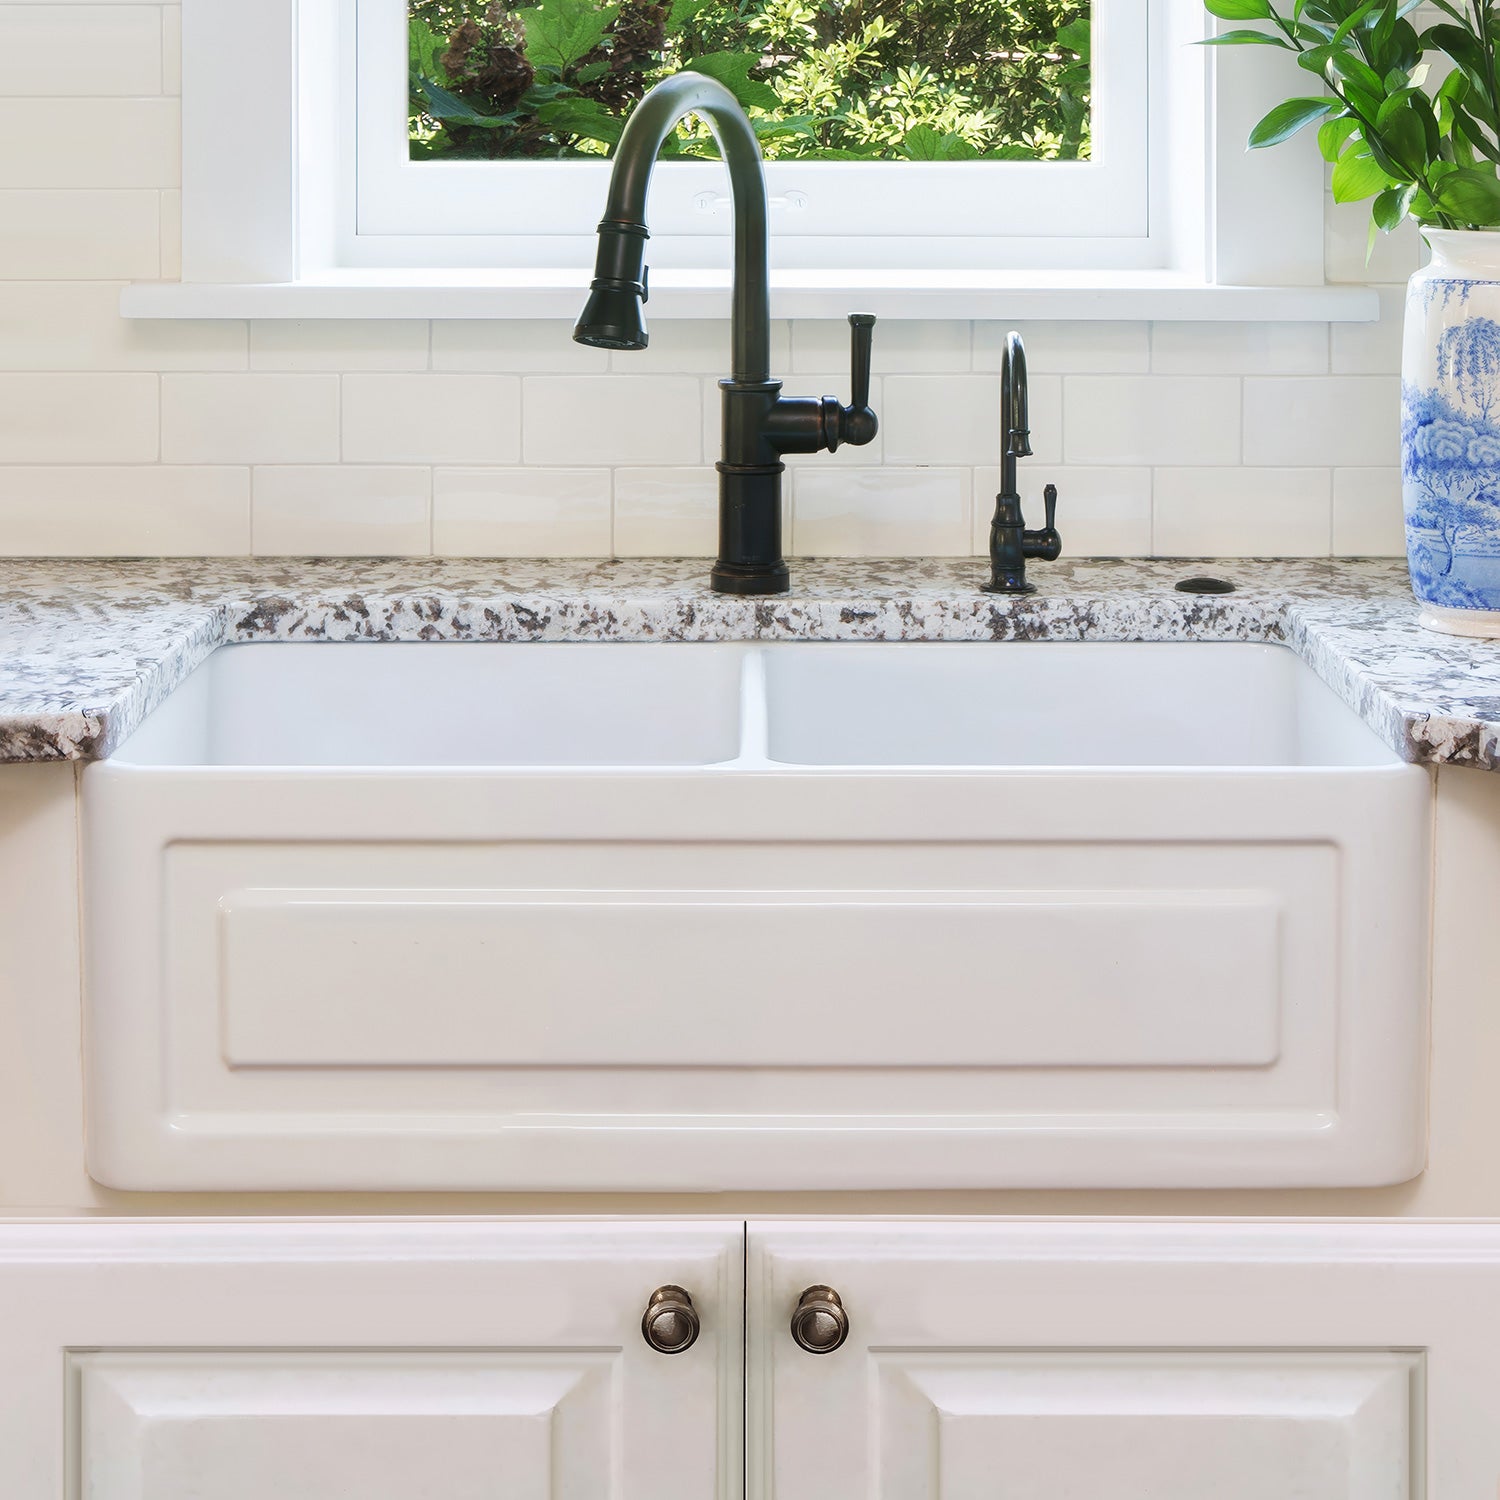 33" reversible double bowl fireclay kitchen sink: raised panel, fluted front apron